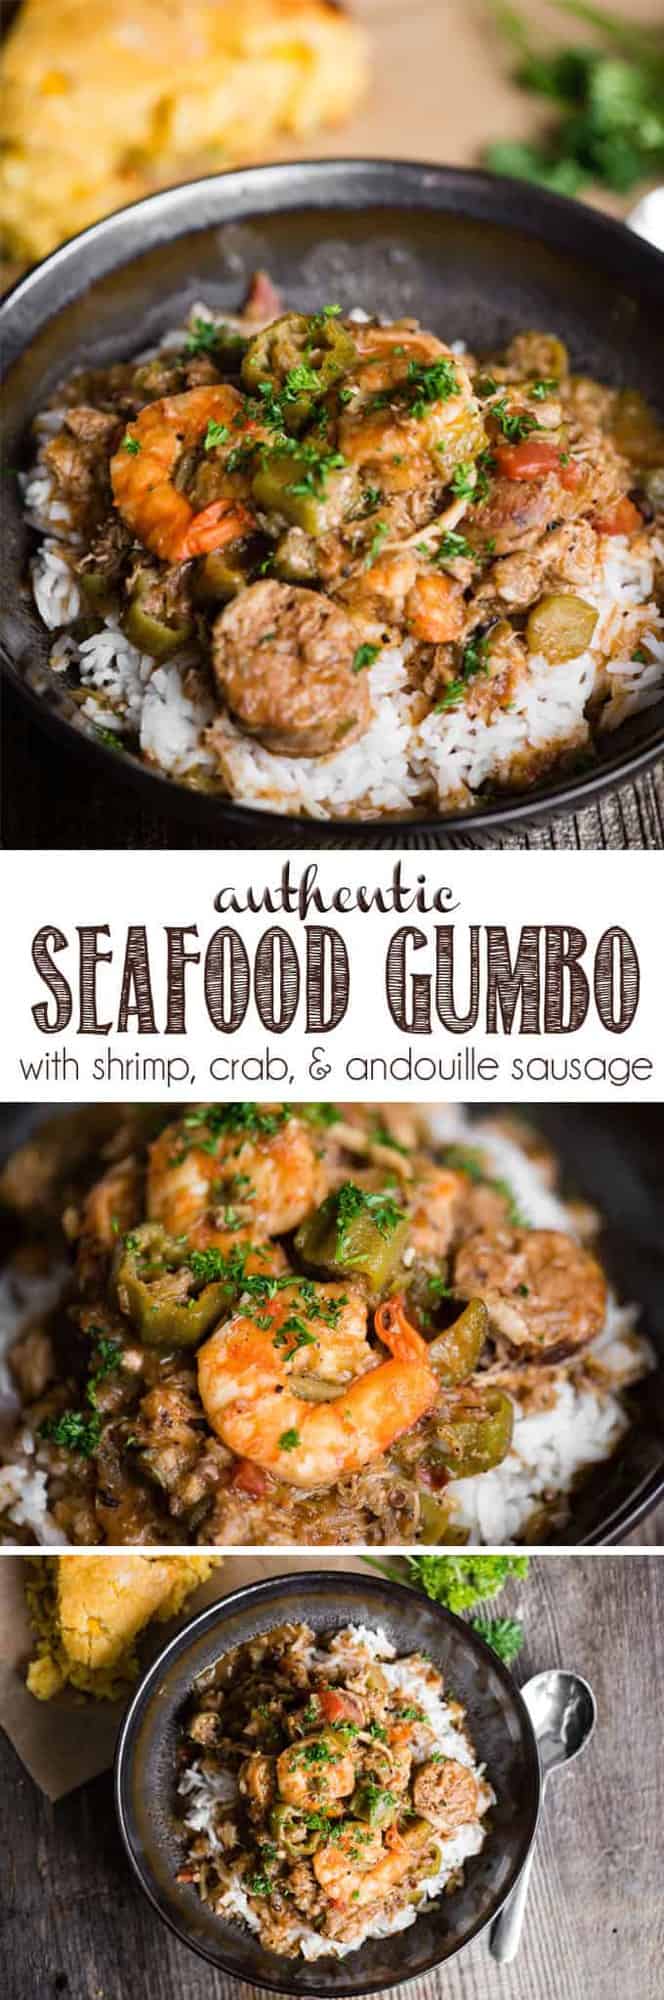 Authentic Seafood Gumbo Recipe | Self Proclaimed Foodie